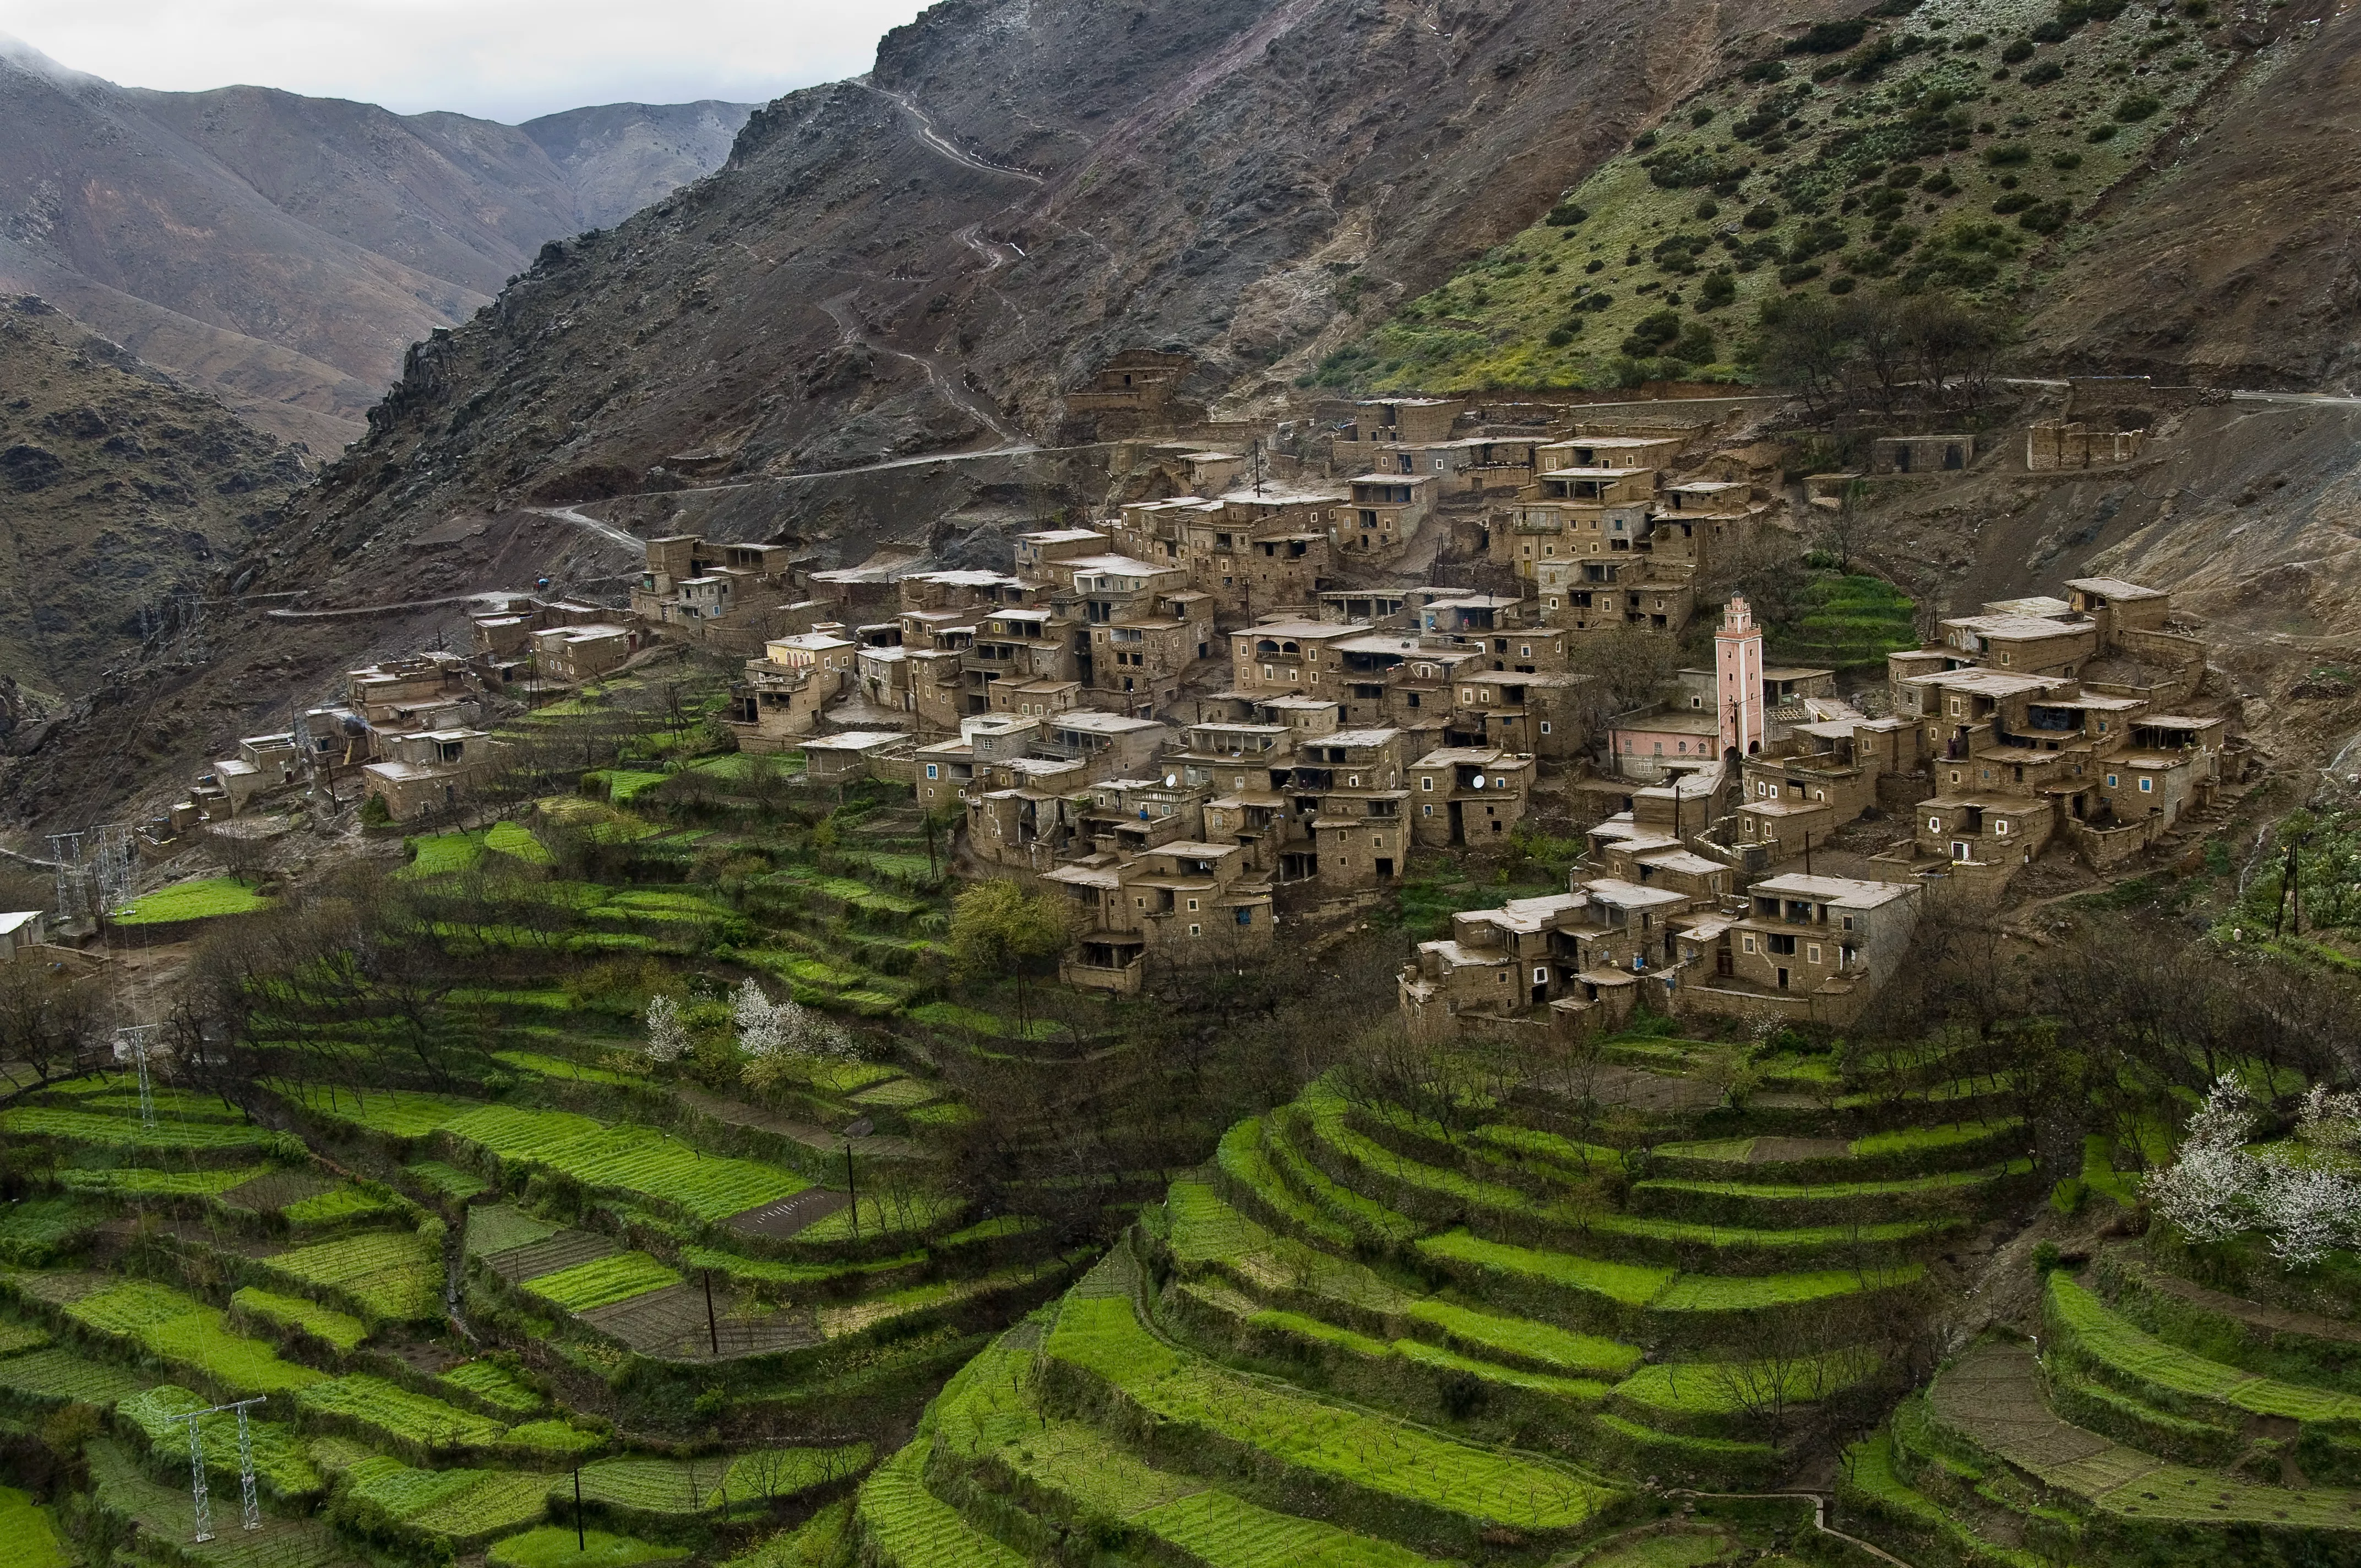 Atlas Mountains Berber Villages in Morocco, Africa | Trekking & Hiking - Rated 3.9